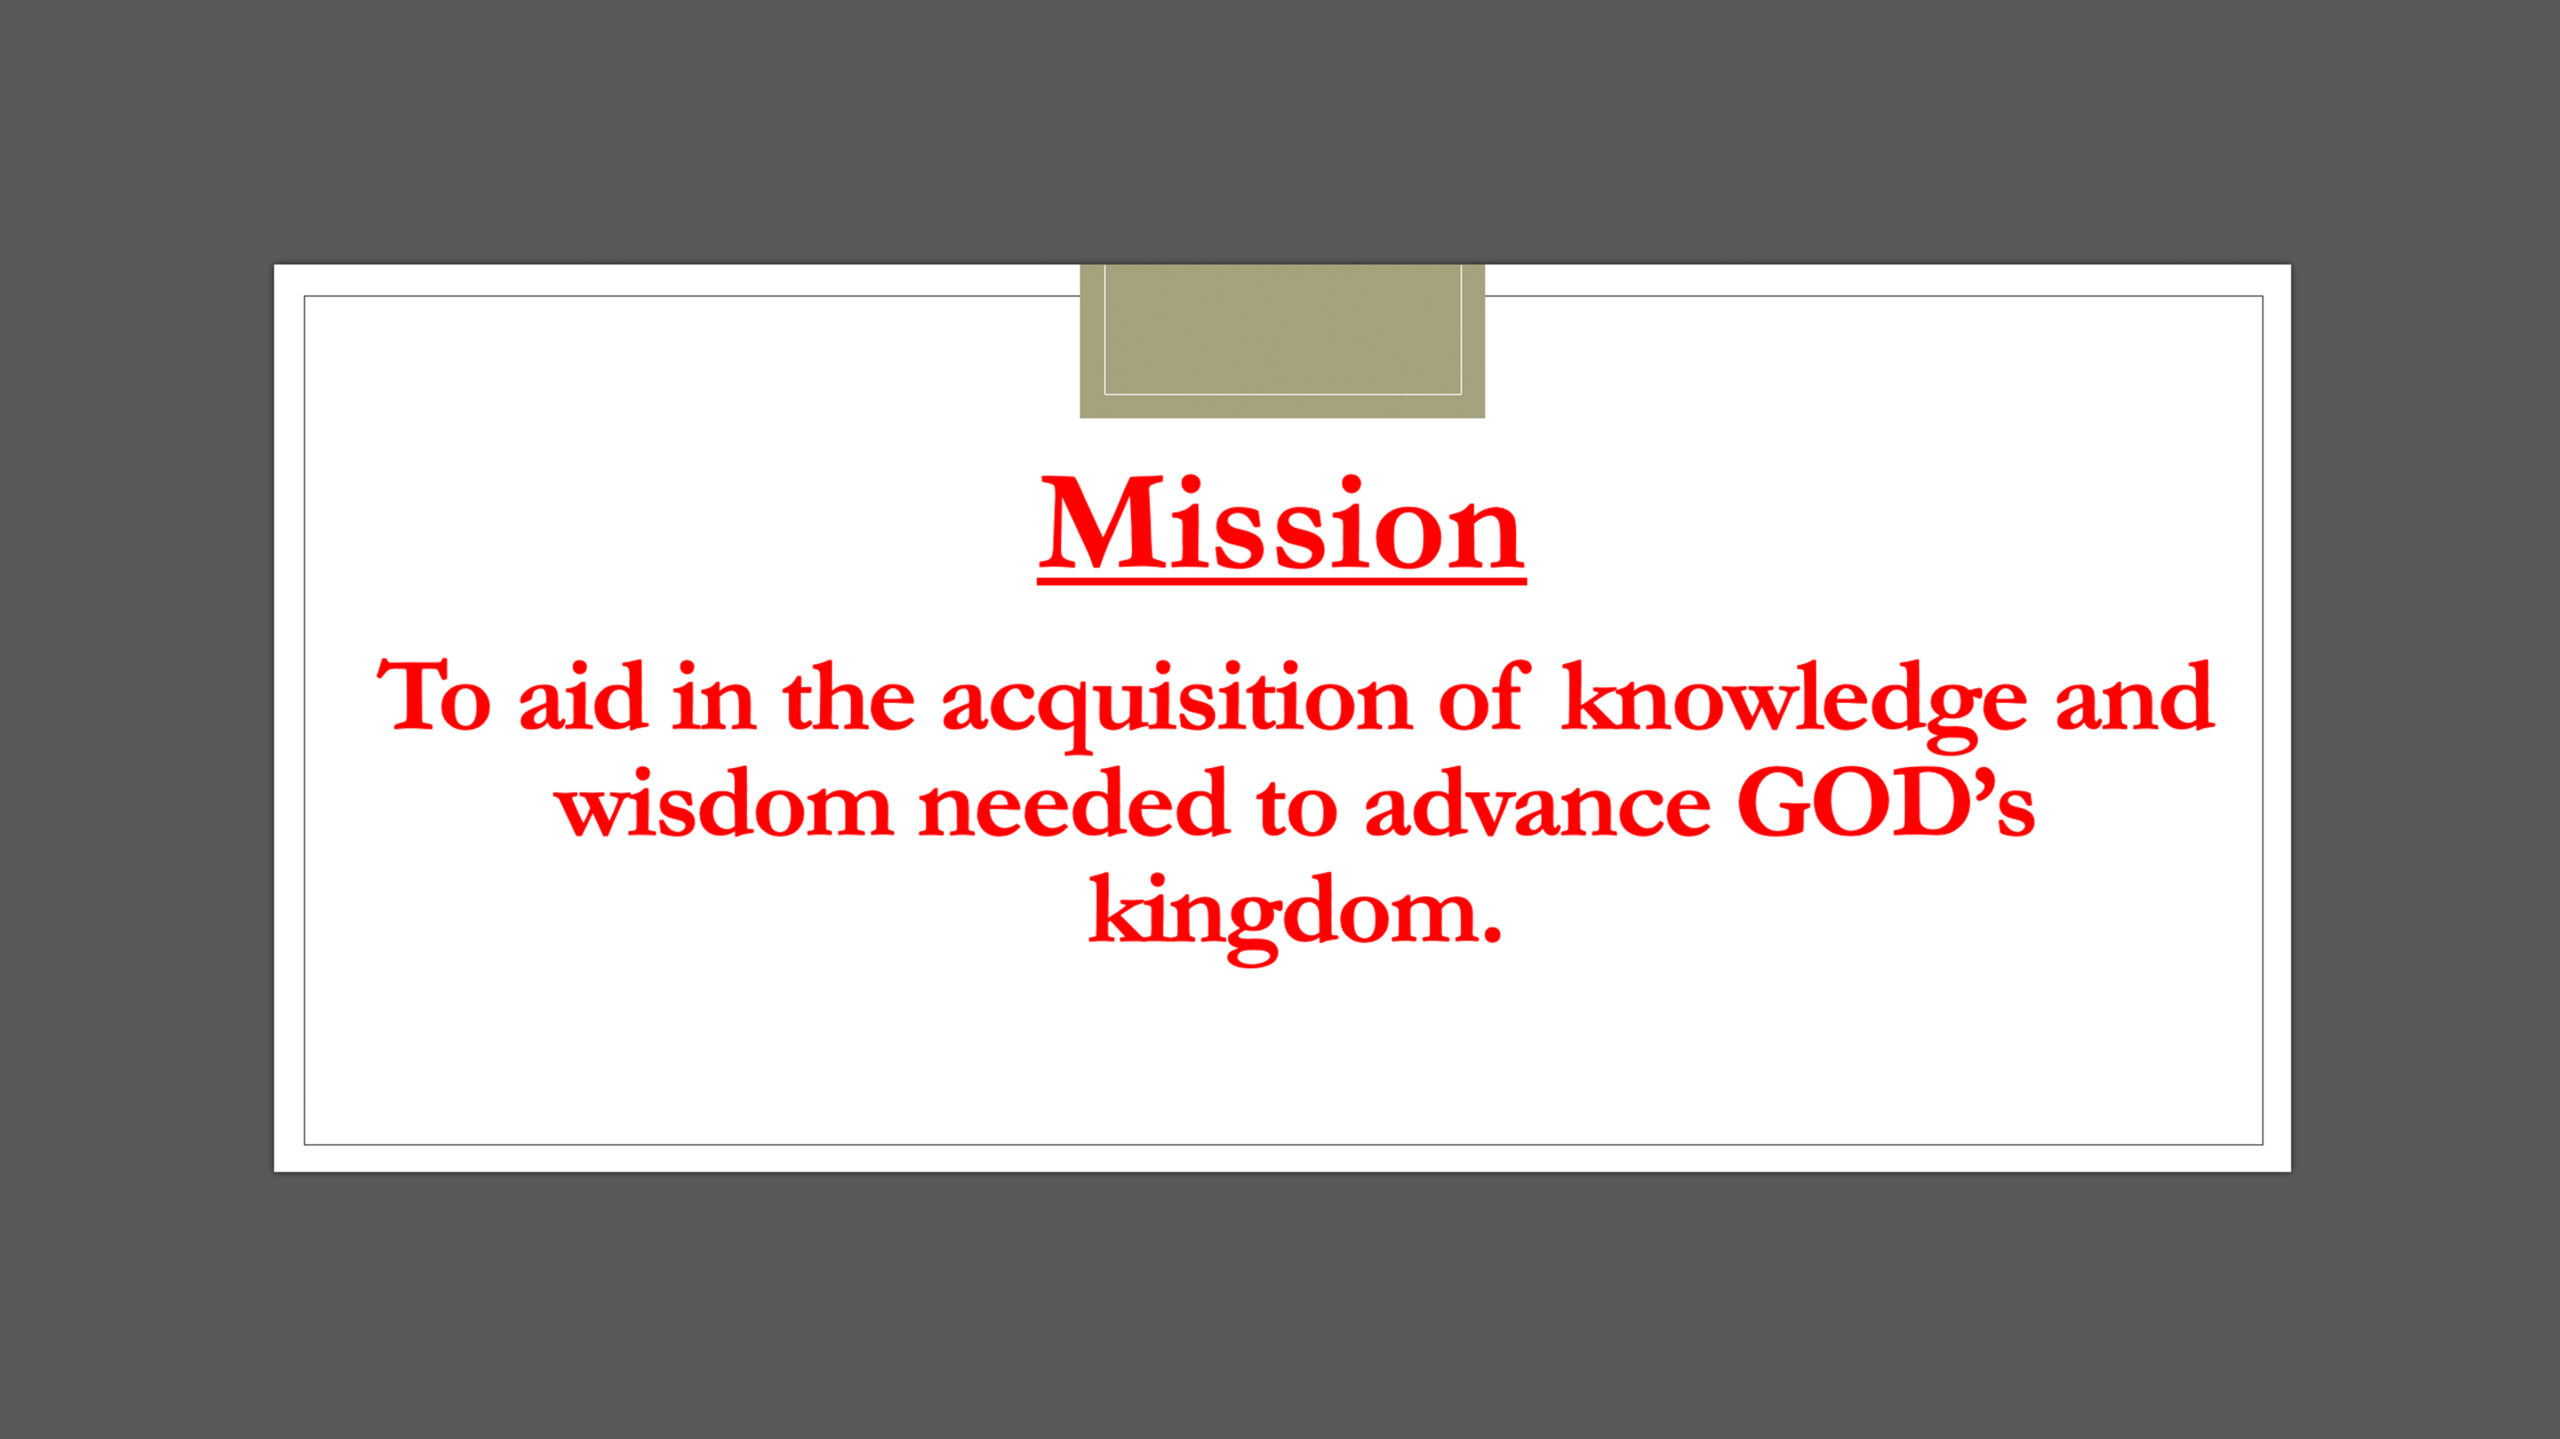 Mission statementTo aid in the acquisition of knowledge and wisdom needed to advance GOD’s kingdom. 